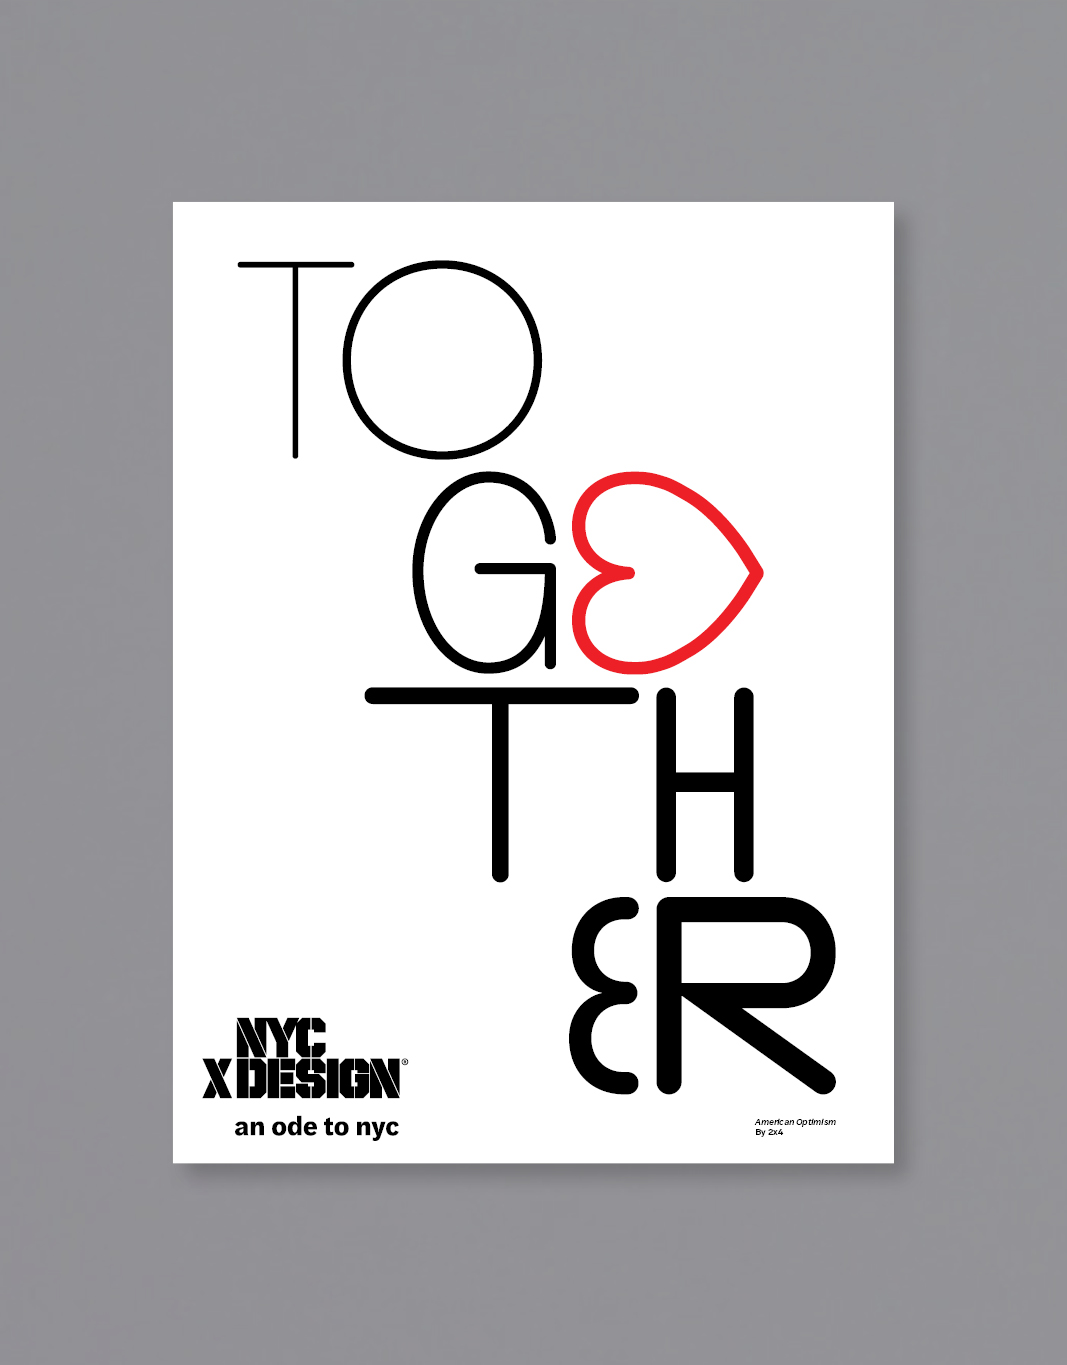 A poster designed by 2x4. The big text says Together in white background.